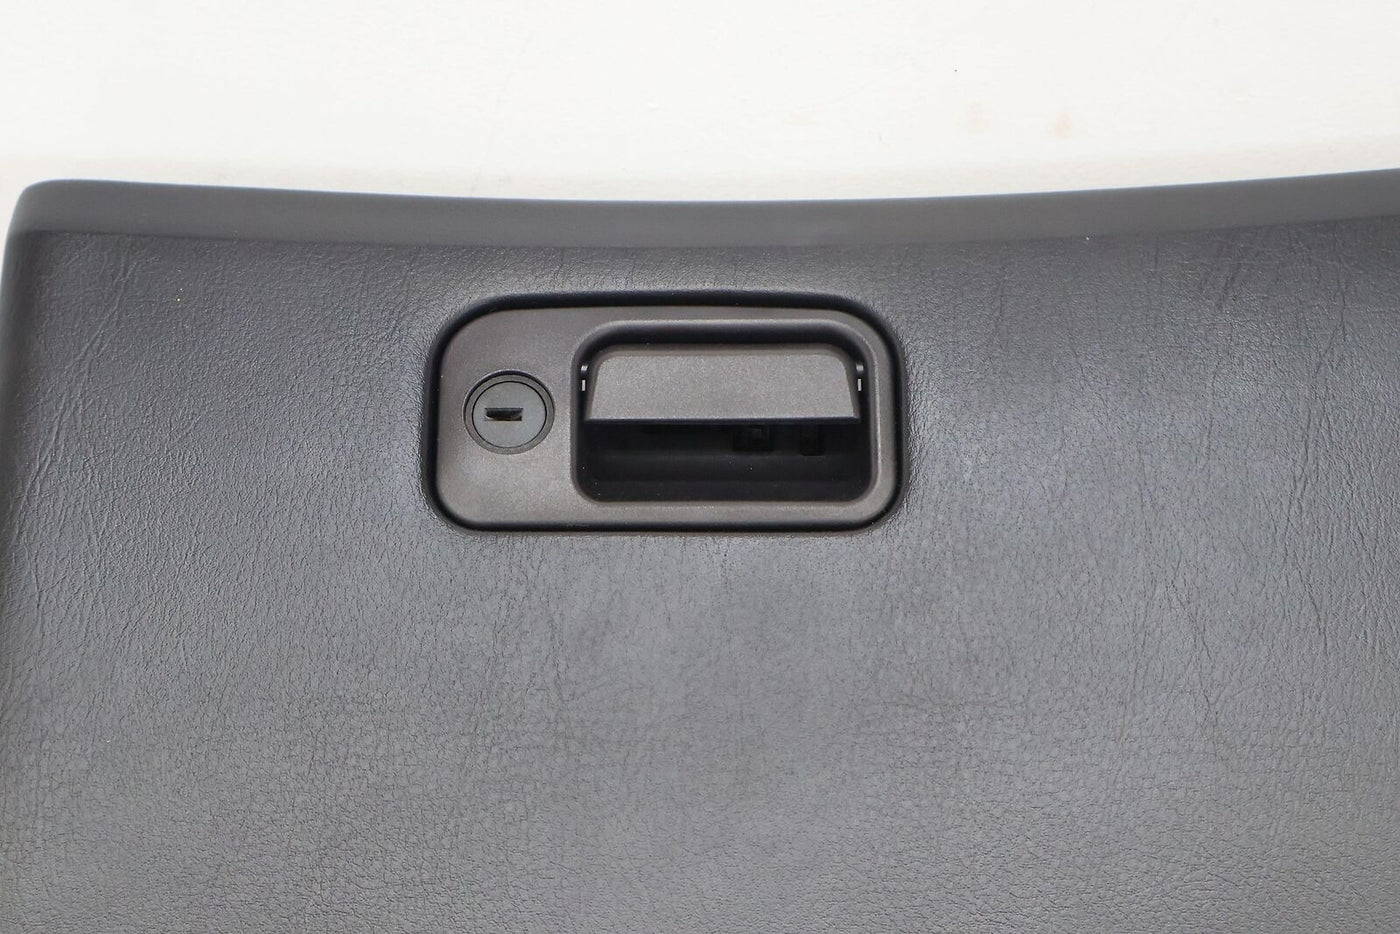 03-05 Ford Thunderbird Interior Glove Box Compartment Door (Black BW) See Notes